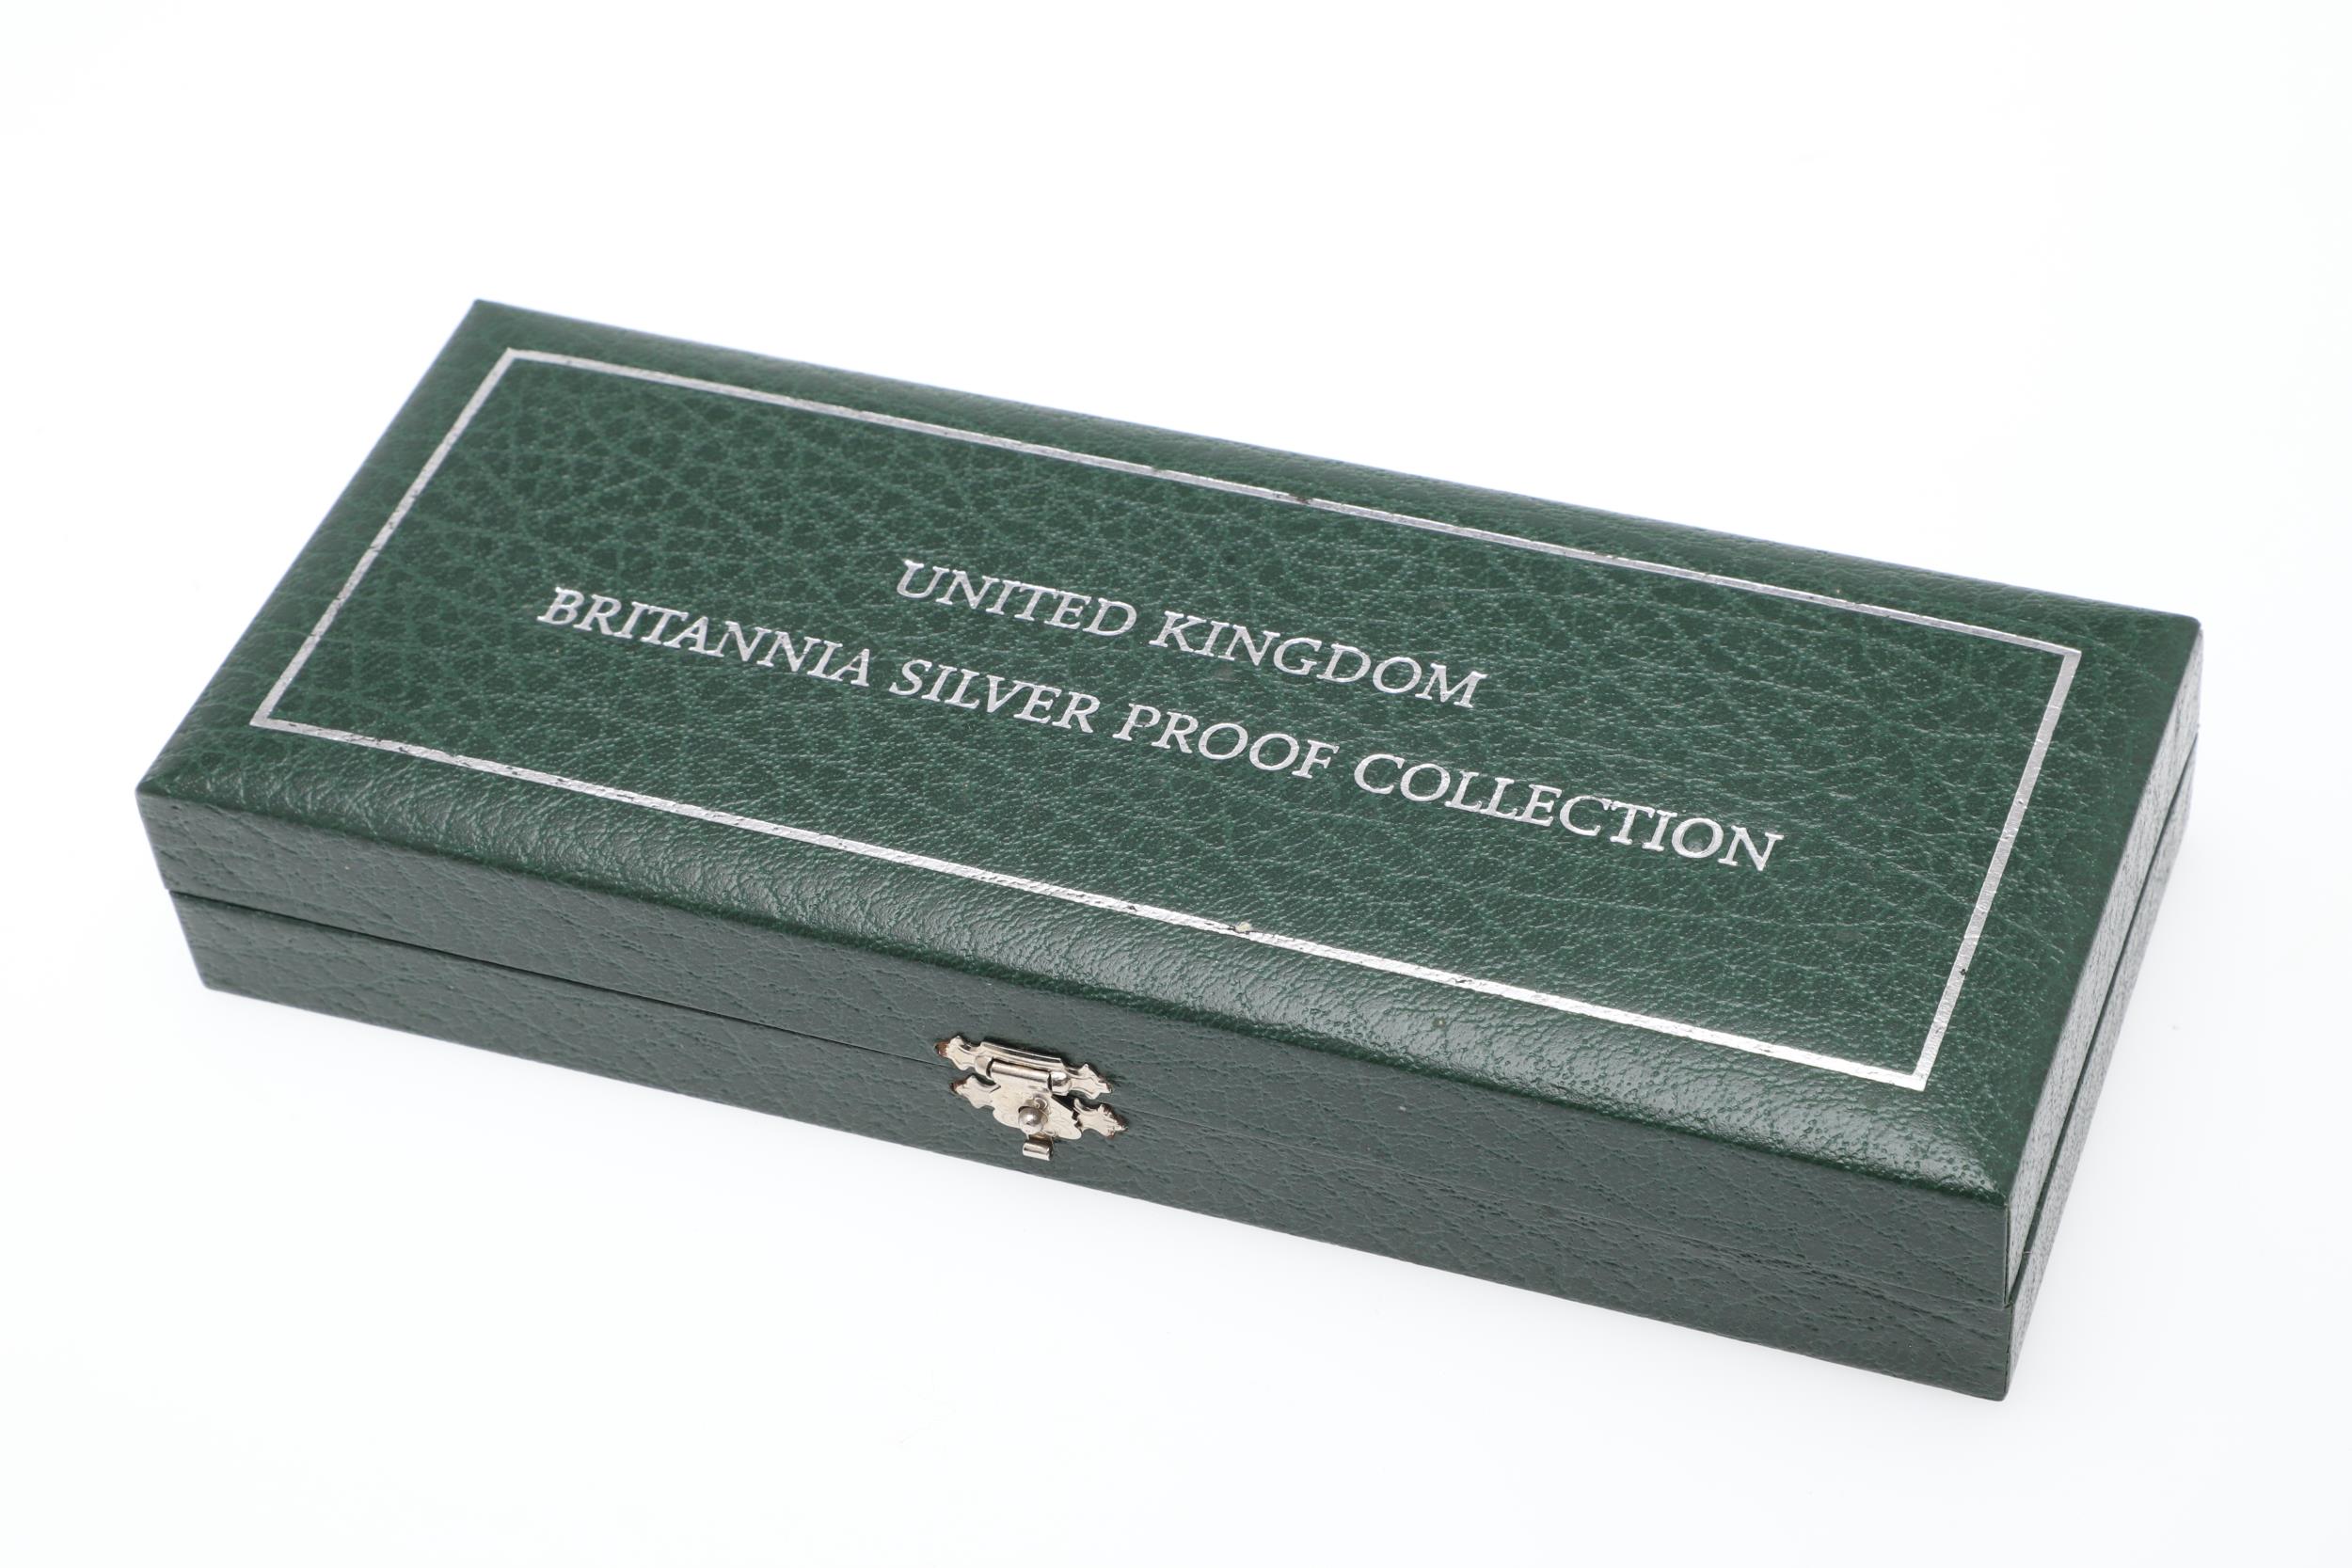 A 1997 SILVER PROOF BRITANNIA FOUR COIN COLLECTION. - Image 8 of 8